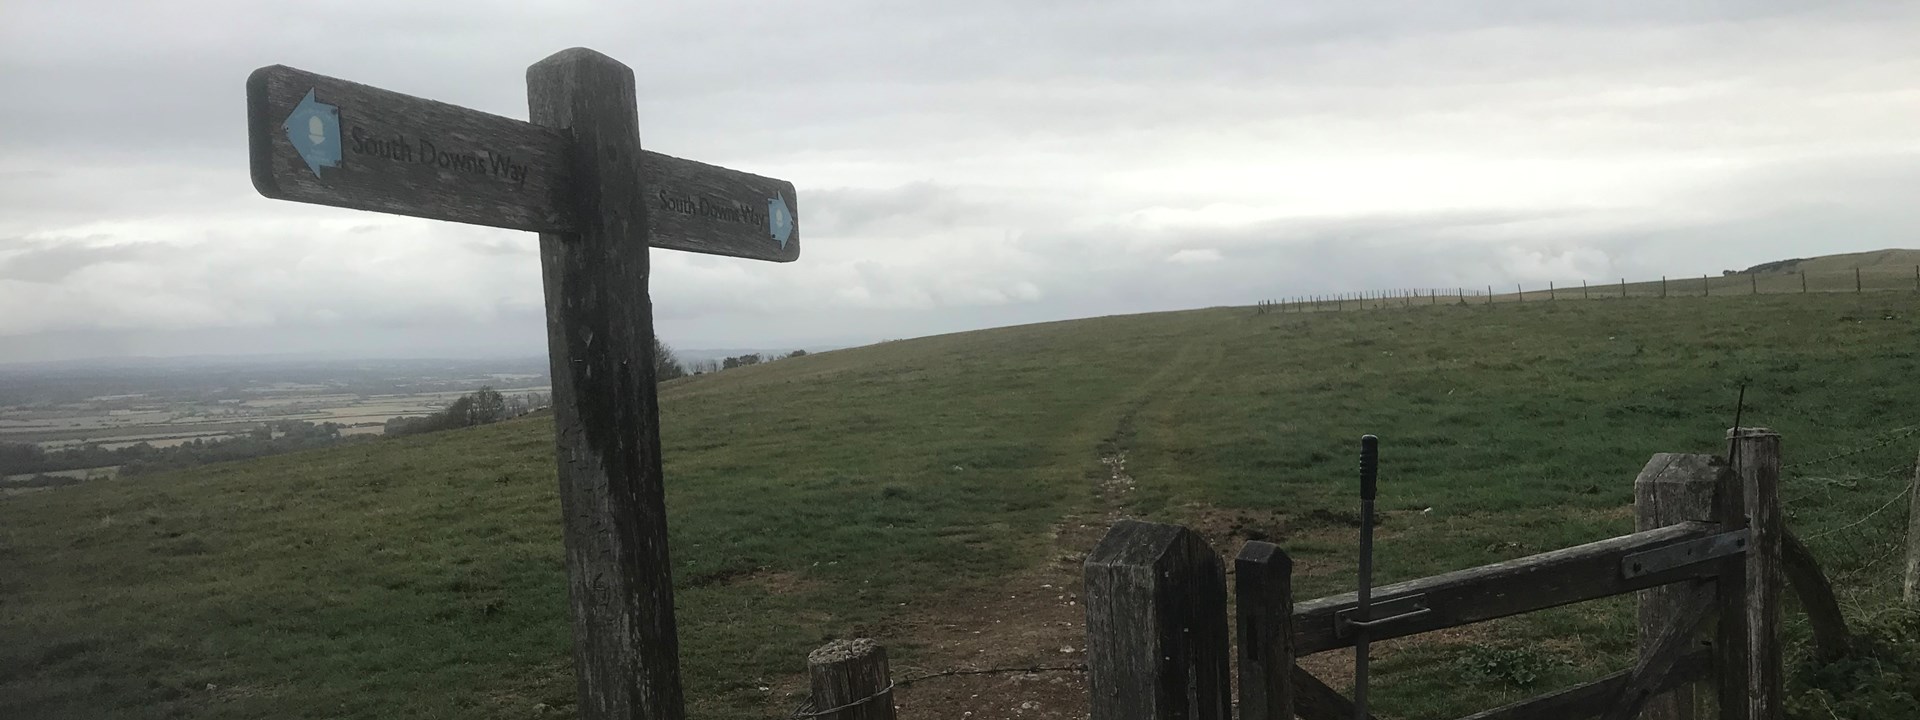 South Downs Way footpath sign and gate